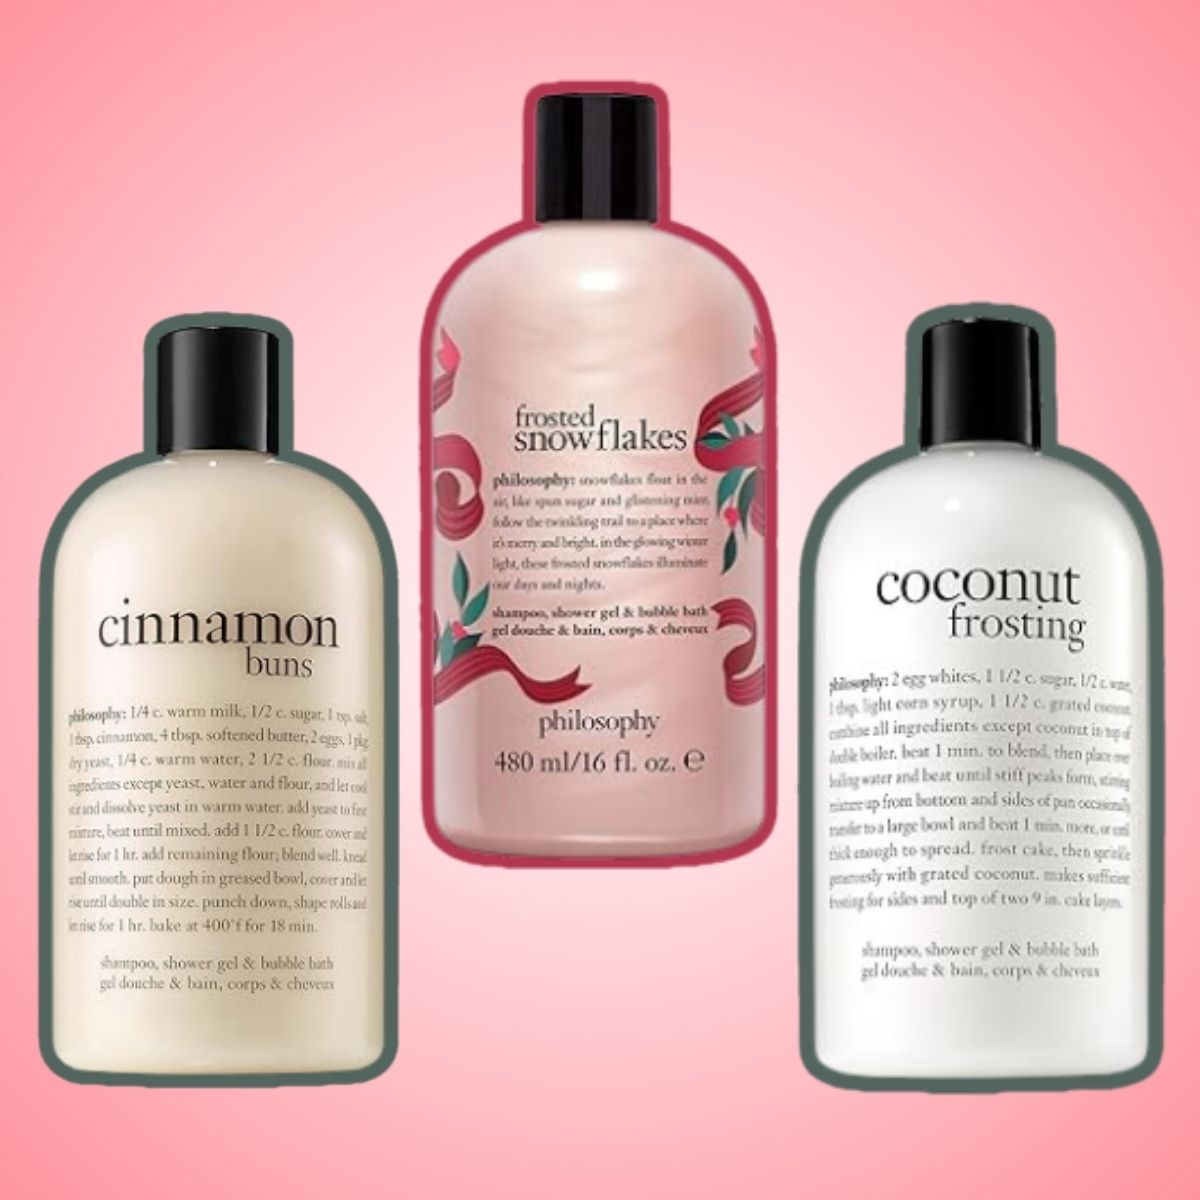 Save on Cult-Fave Classic & Holiday Edition Philosophy Shower Gels